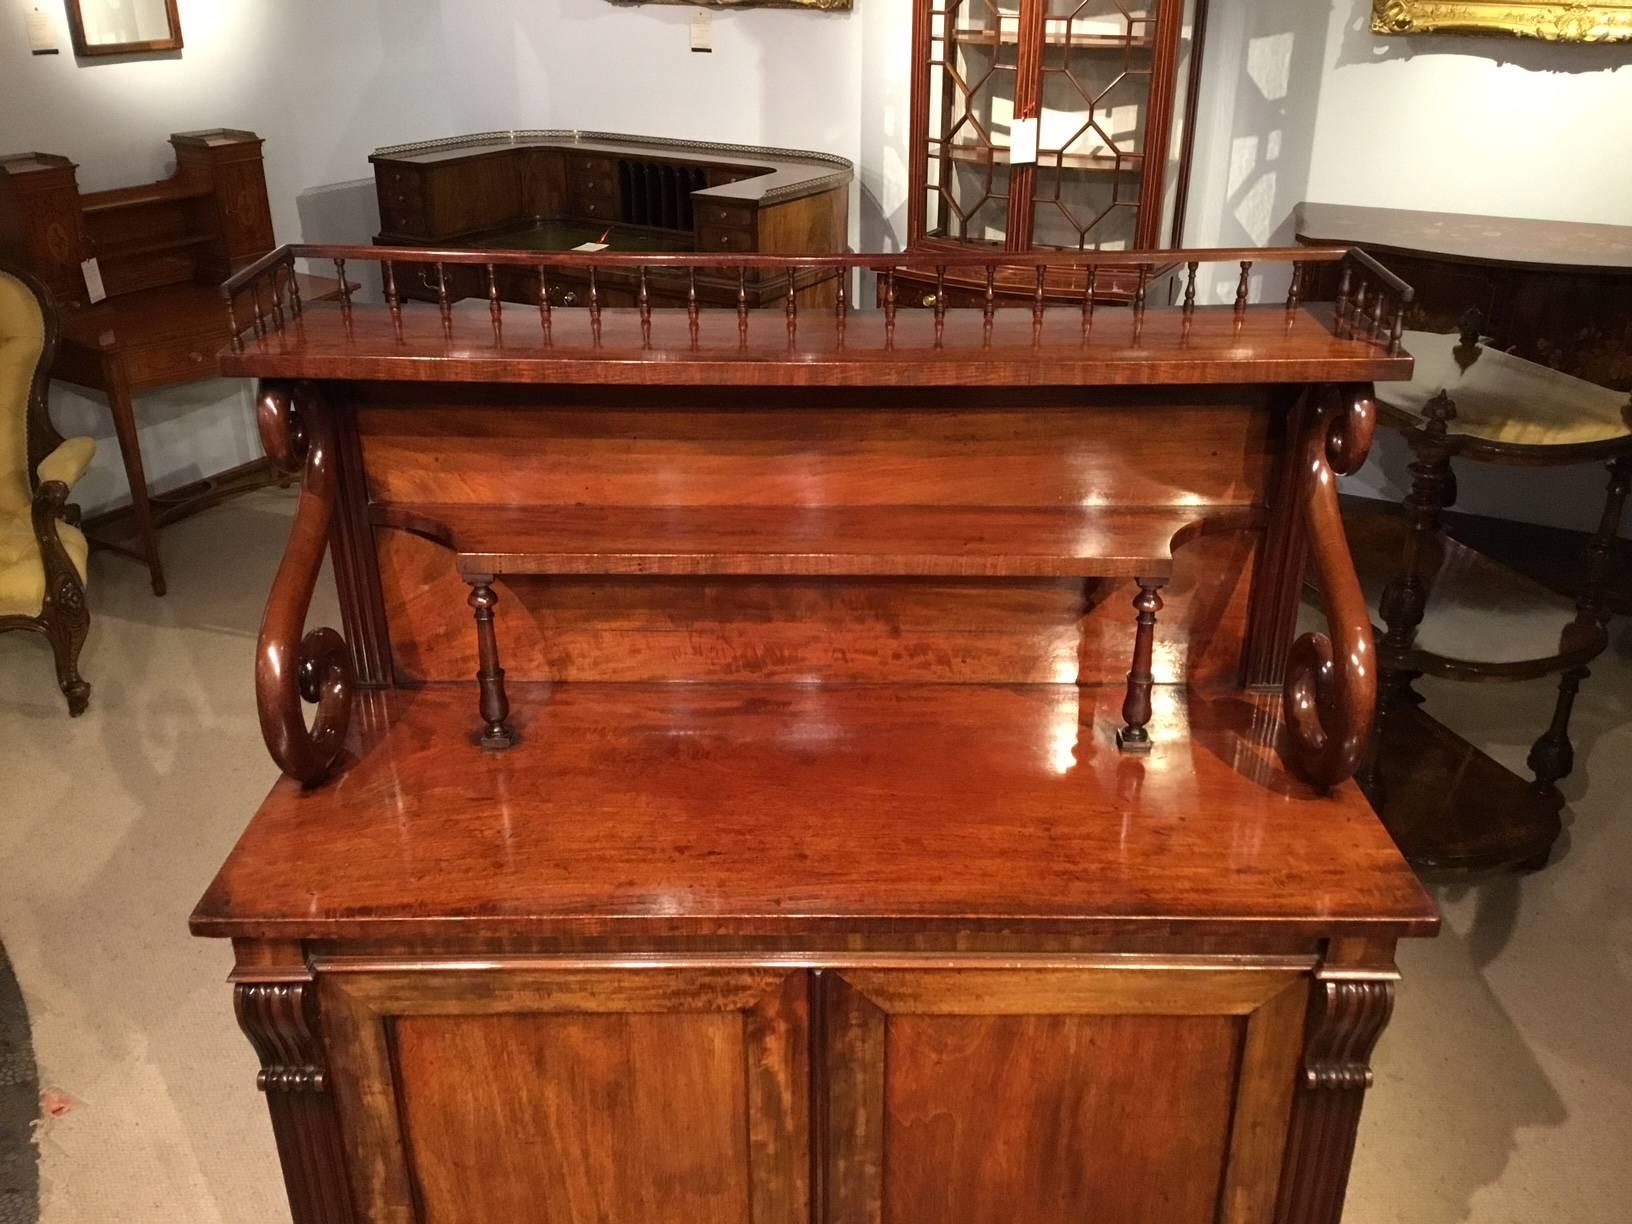 A mahogany Regency period antique chiffonier possibly by Gillows of Lancaster. The upper section with a turned spindle balustrade gallery above a shelf supported by S shaped scrolls, with a further shaped shelf and reeded pilasters. The lower